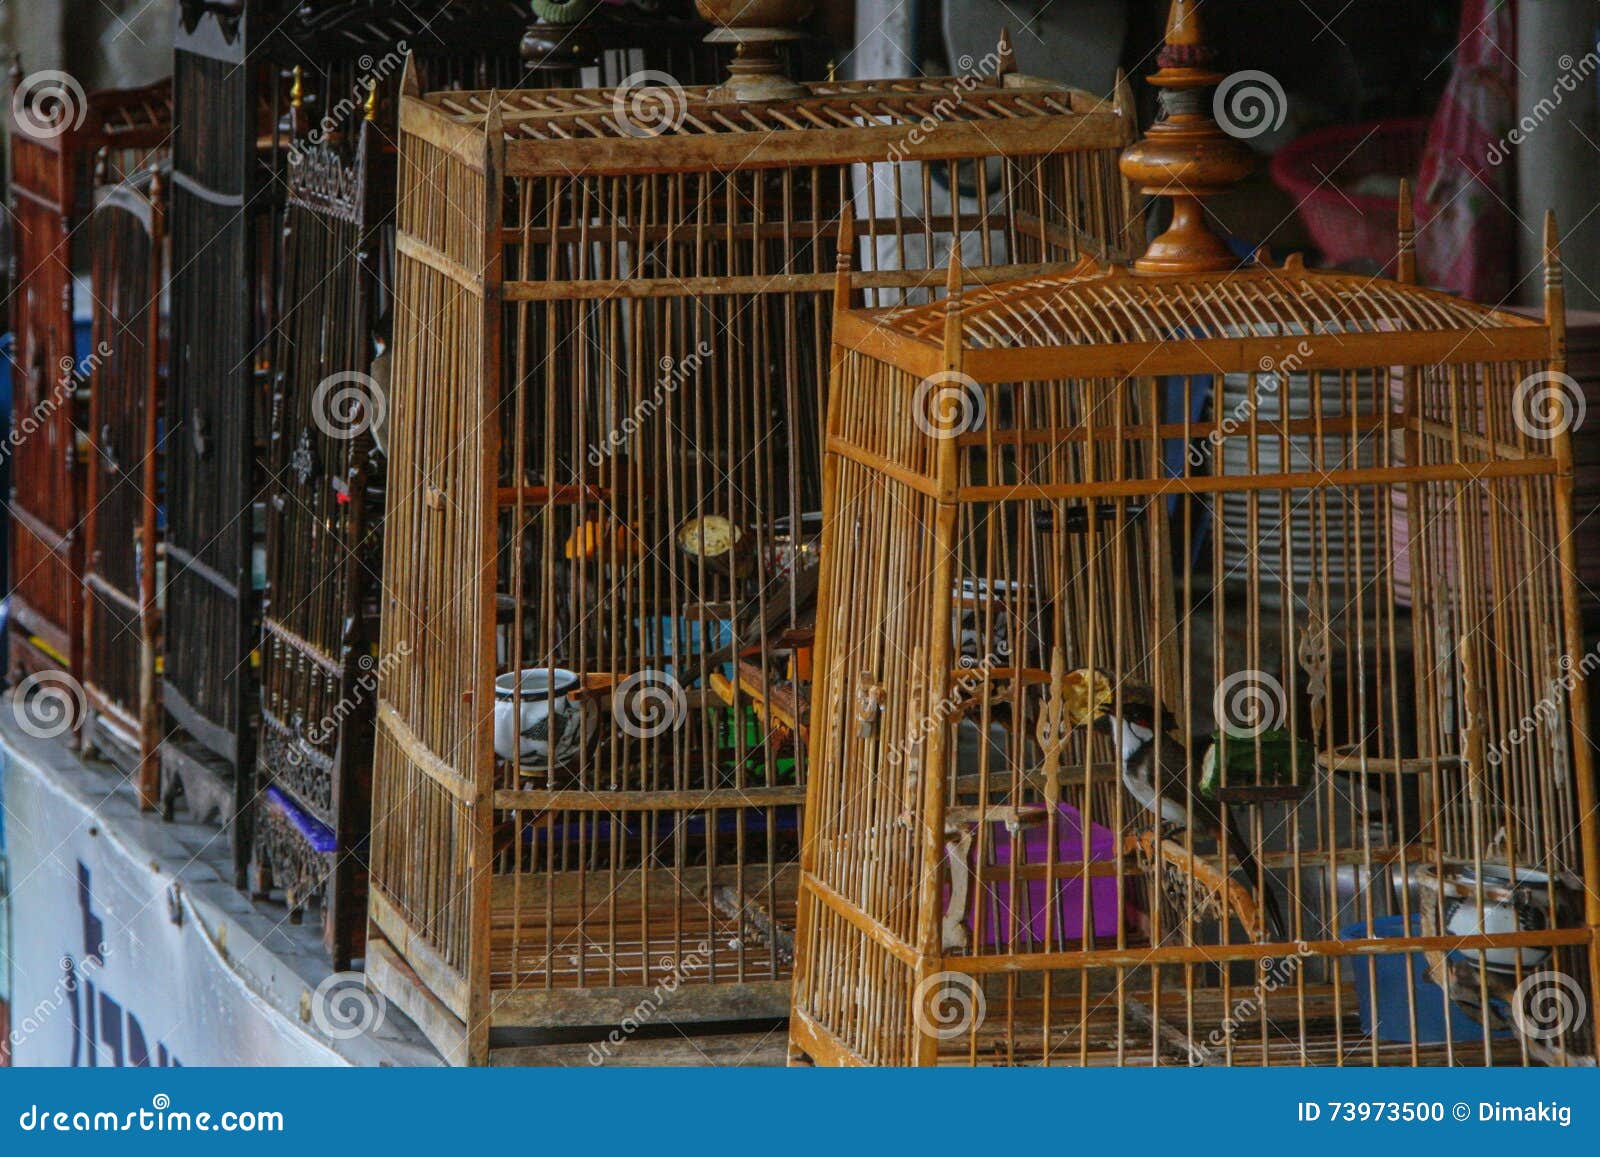 songbirds in cages, thailand